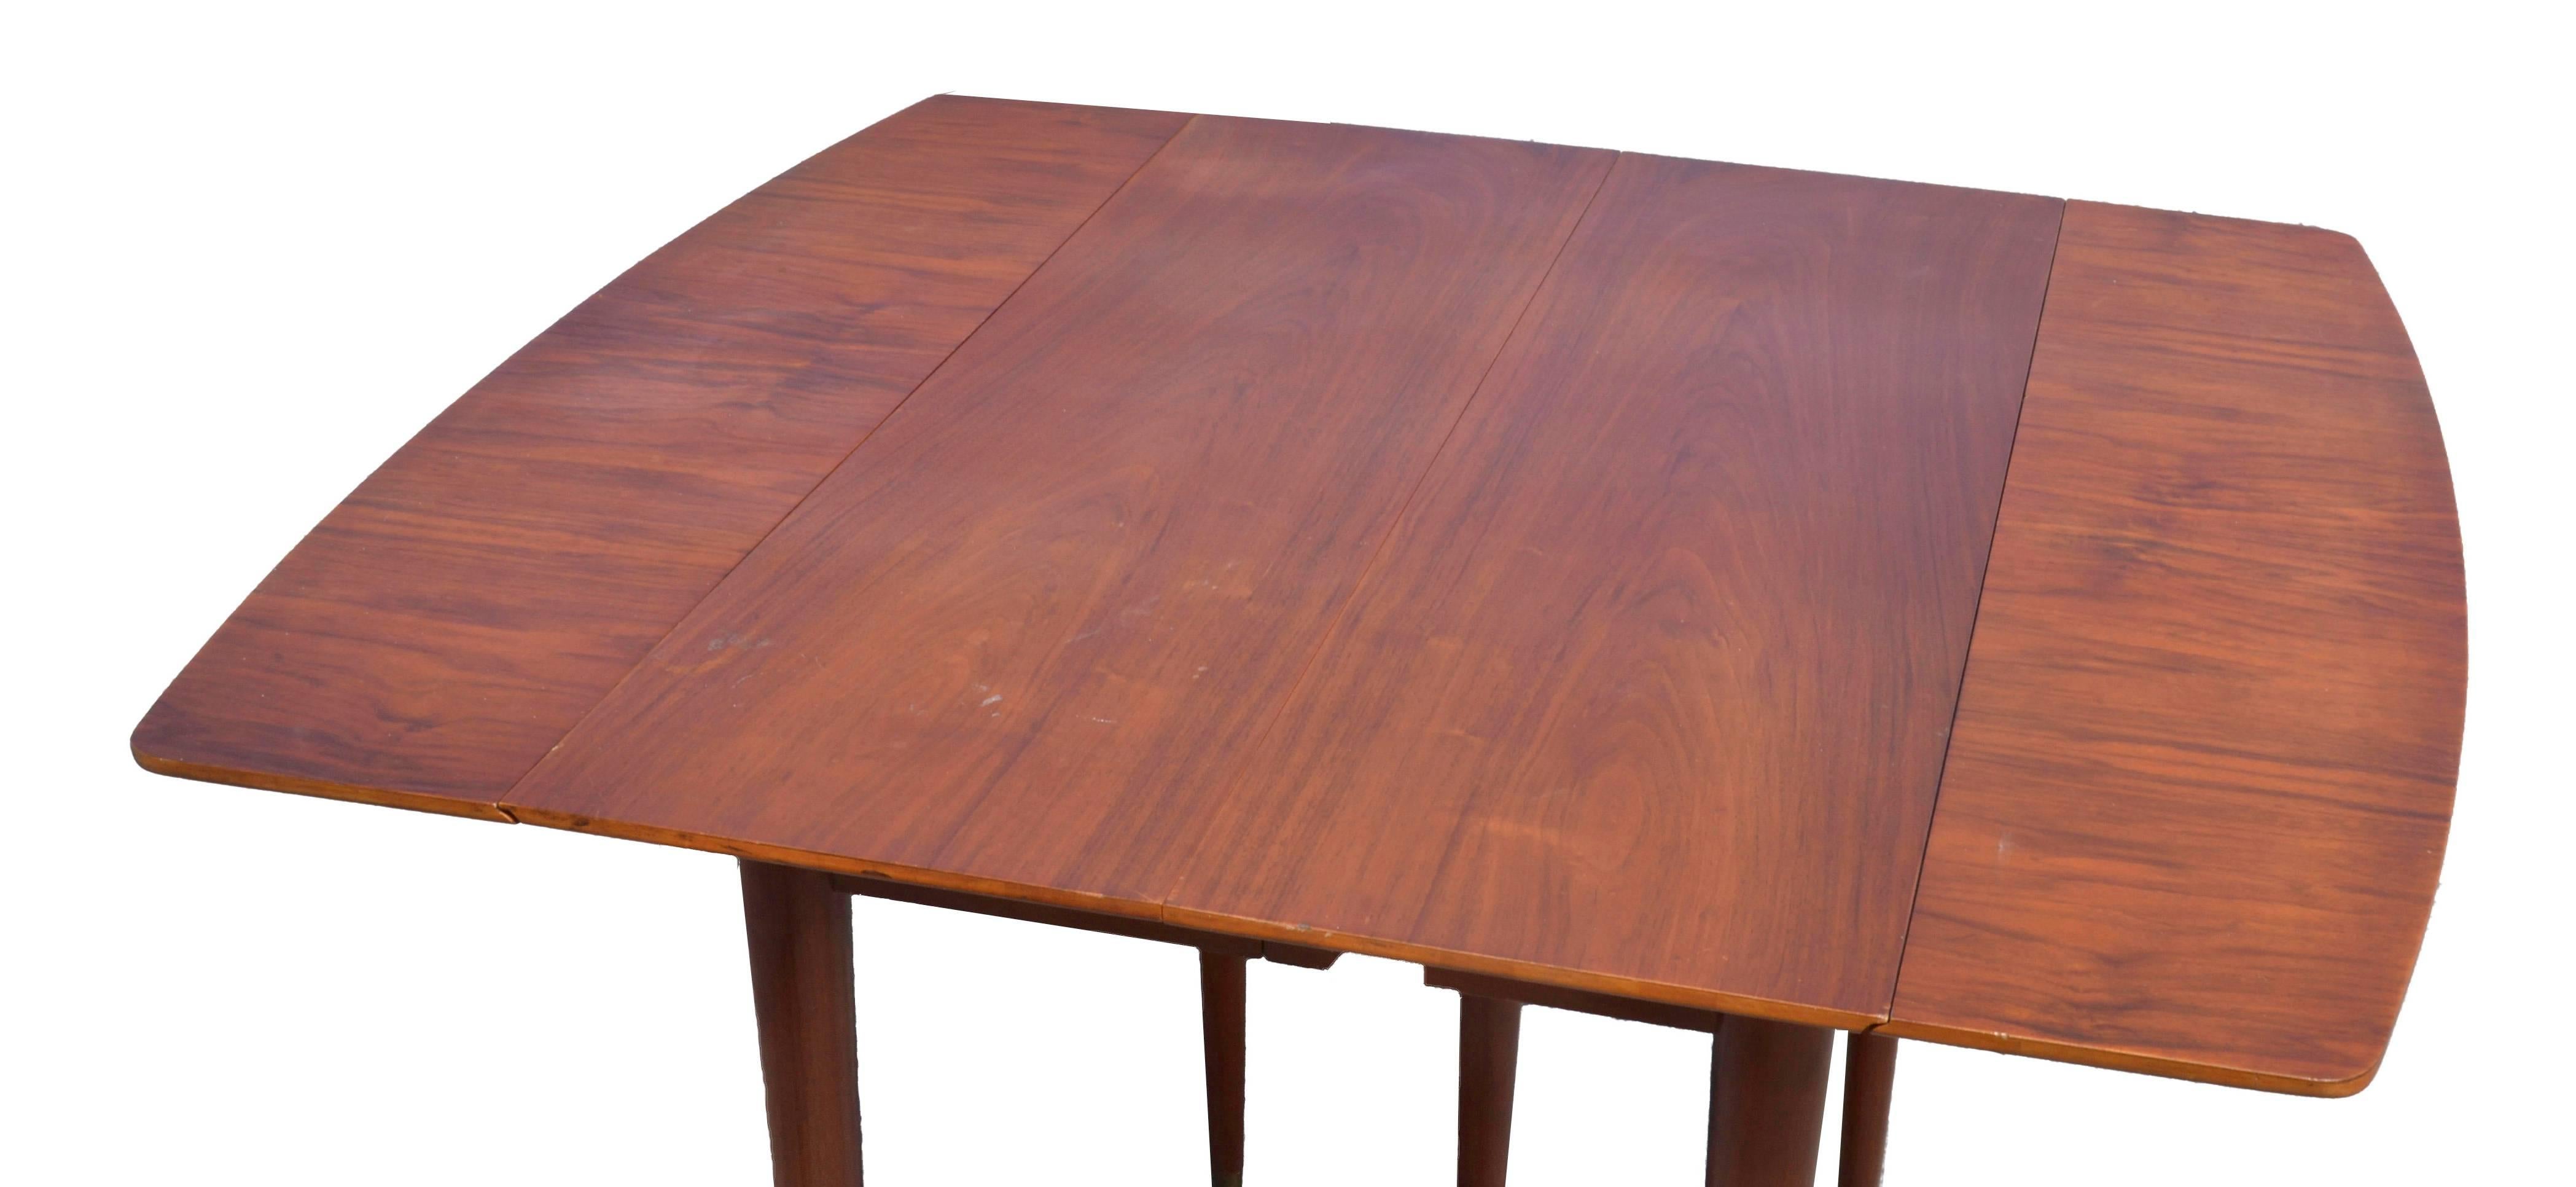 1950 Vintage John Widdicomb Mid-Century Modern walnut finish extension table with four leaves.
Four leaves each 13.5 inches wide. 
Max table length is 93.75 inches.
Seats eight People comfortable.
Smallest size is 39 inches long by 22.25 wide.